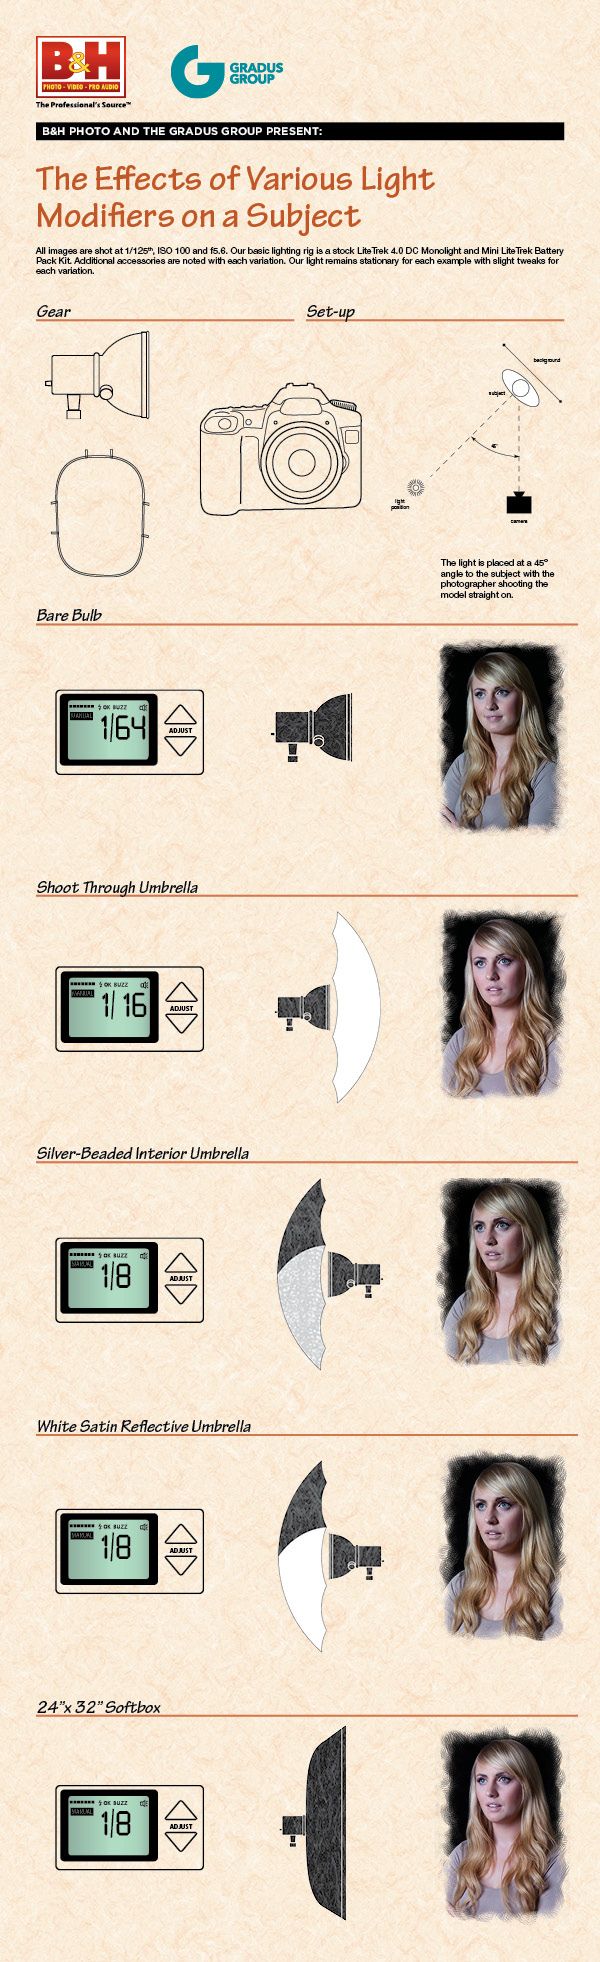 The Effects of Various Light Modifiers on a Subject